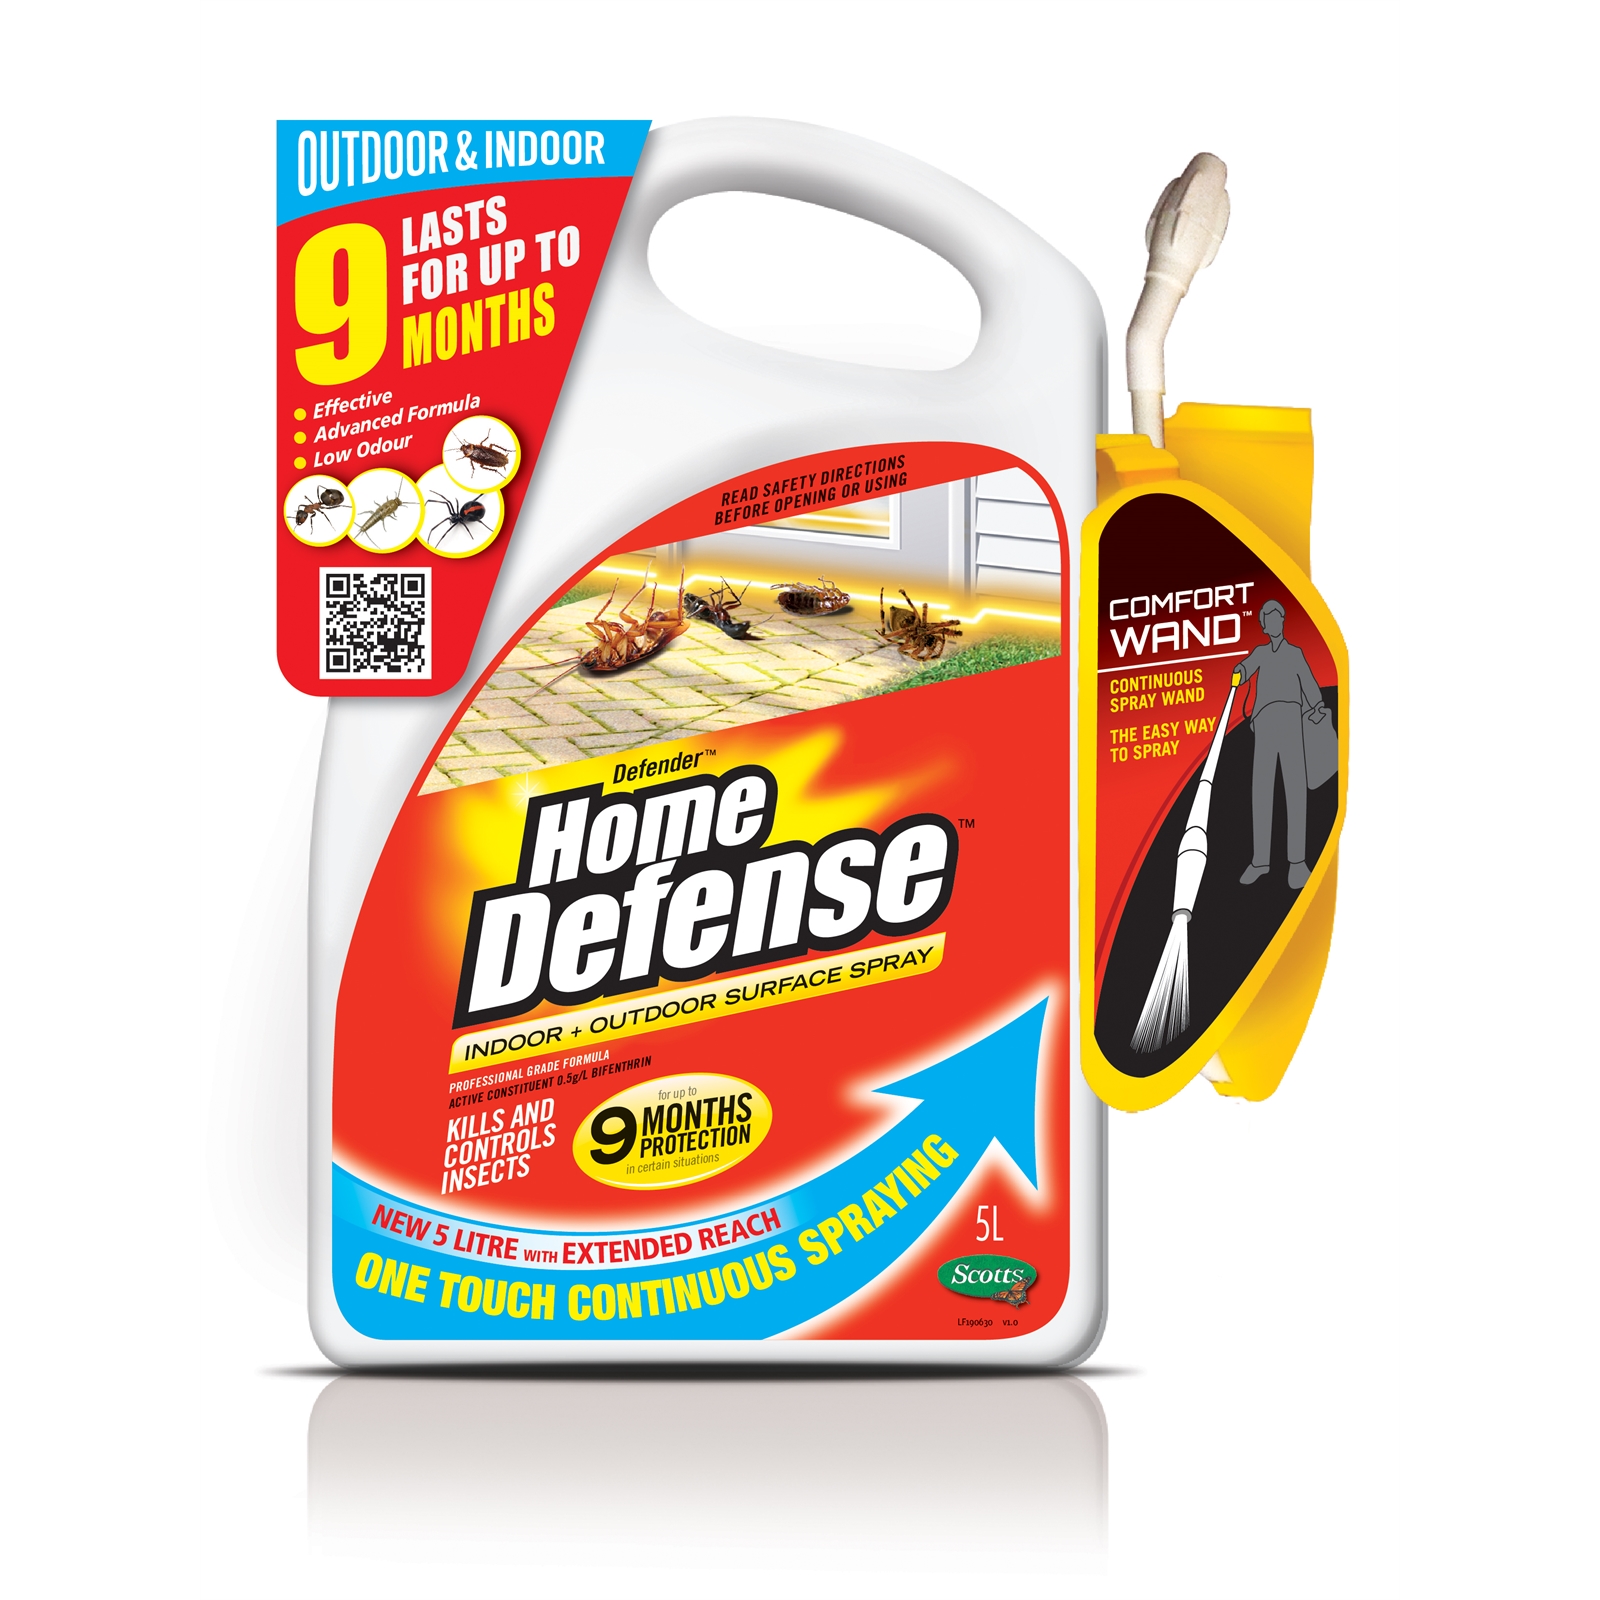 Defender 5L Home Defense Surface Insecticide